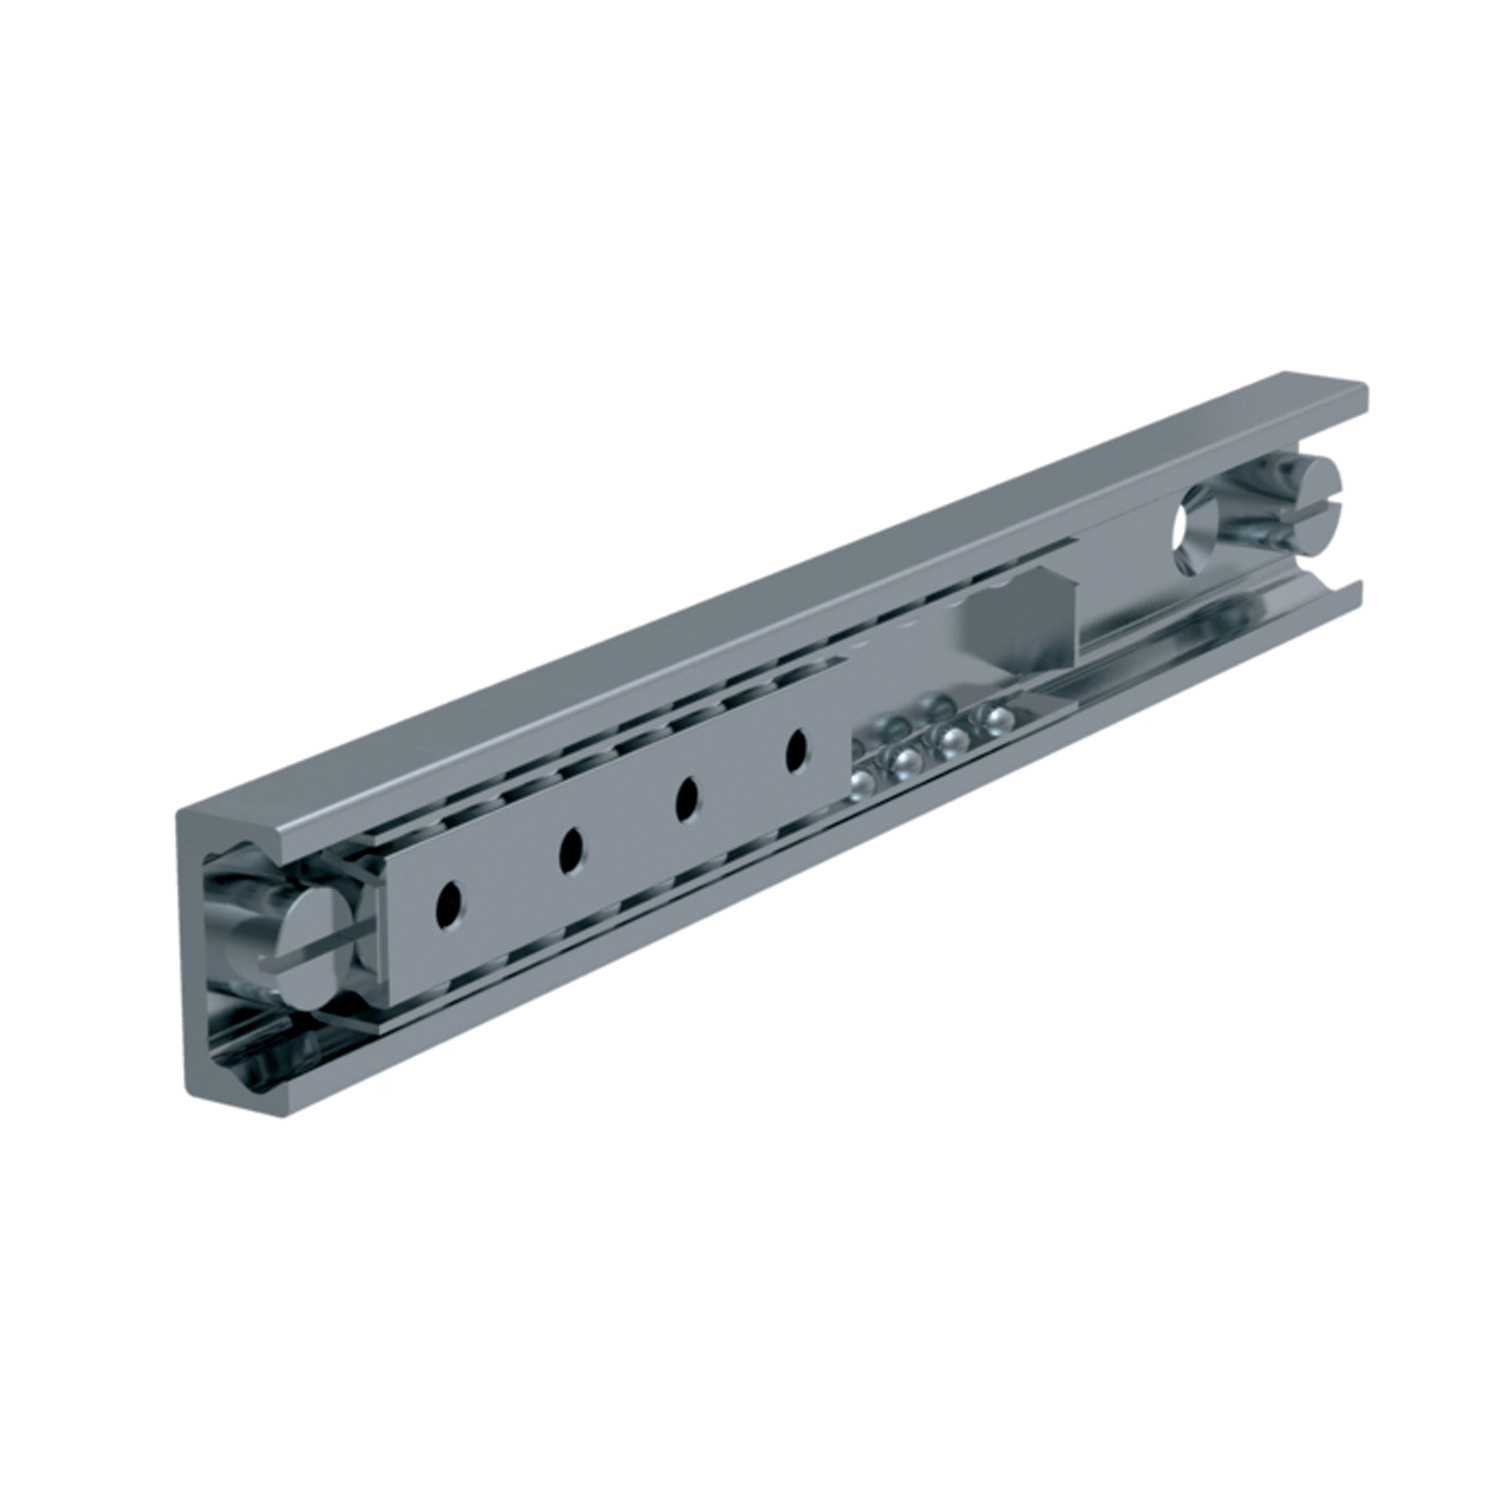 High Load Rails Only for horizontal linear translation applications. An affordable easy sliding rail system for heavy duty shorter stroke applications (lengths up to 2 metres).